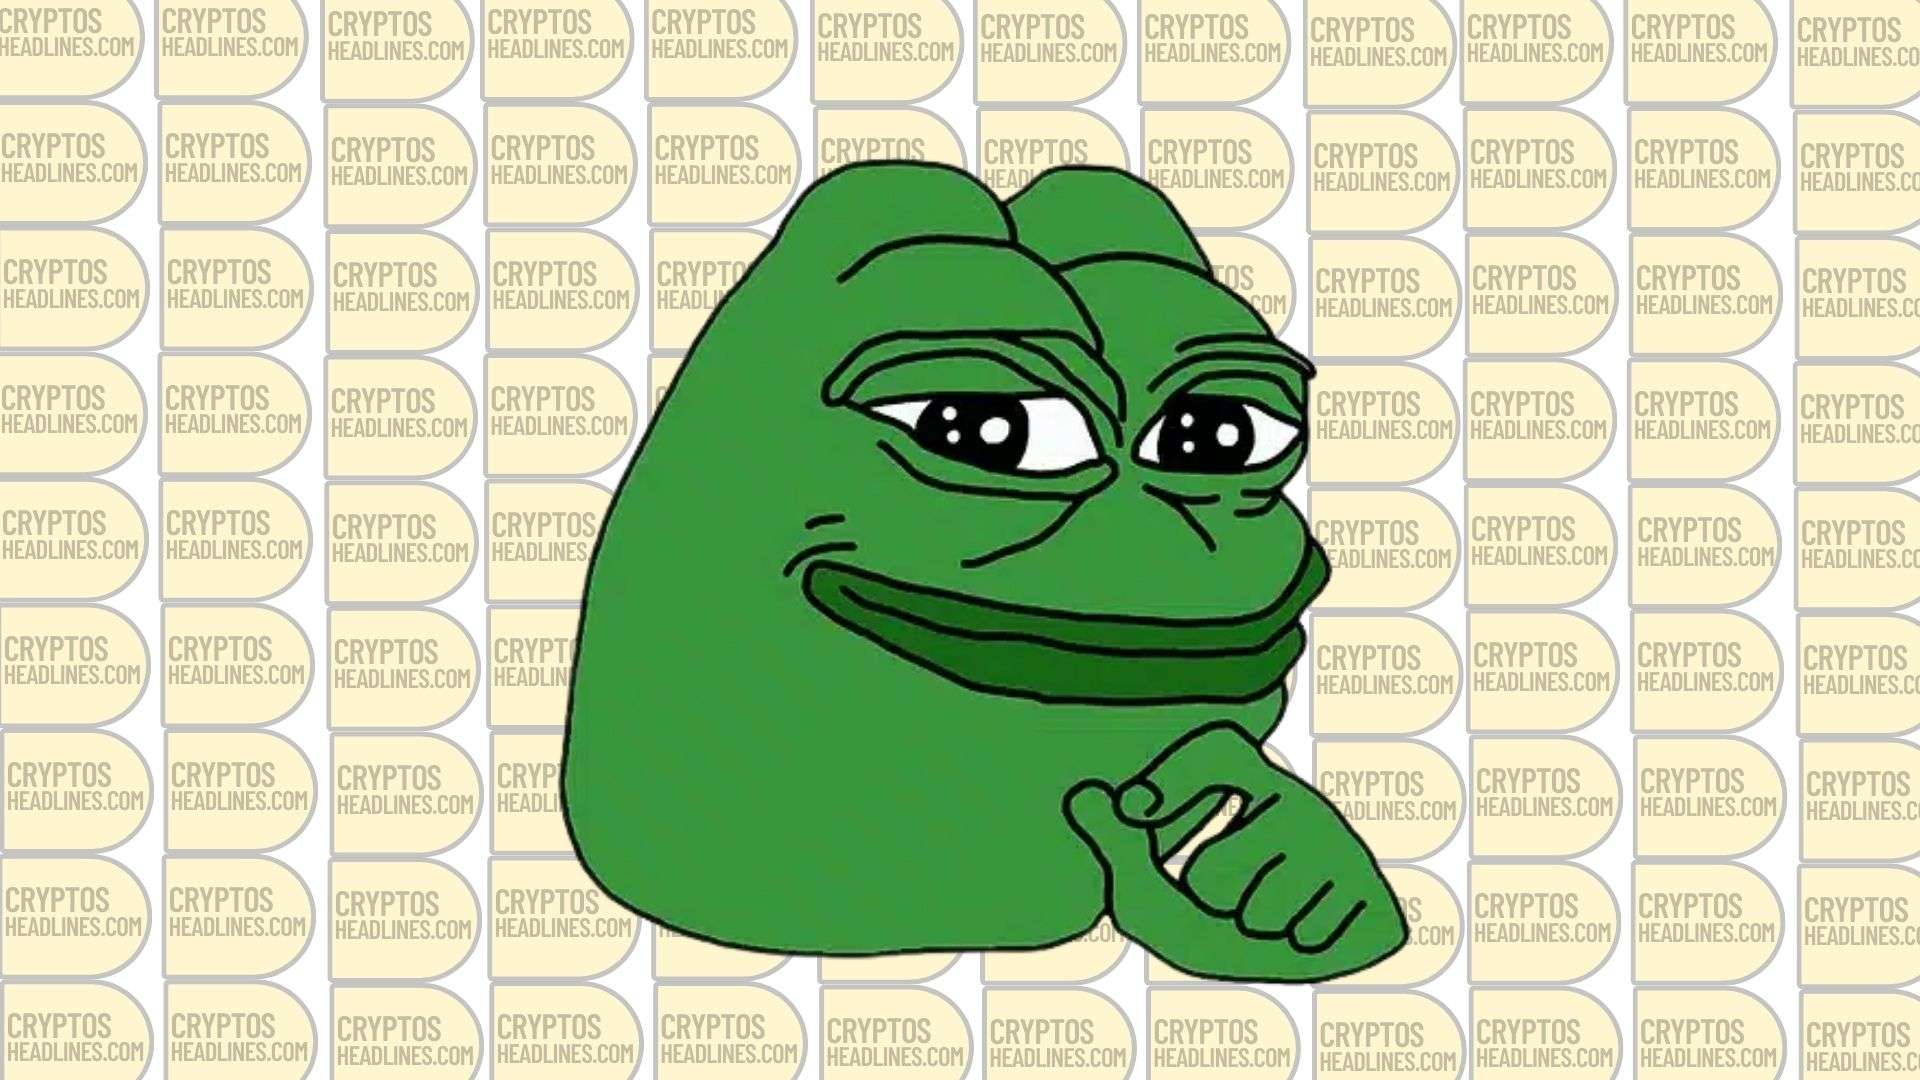 PEPE Token Hits Record High with $4.4B Market Cap; Can WIF- SHIB- BONK or DOGE Follow Suit?